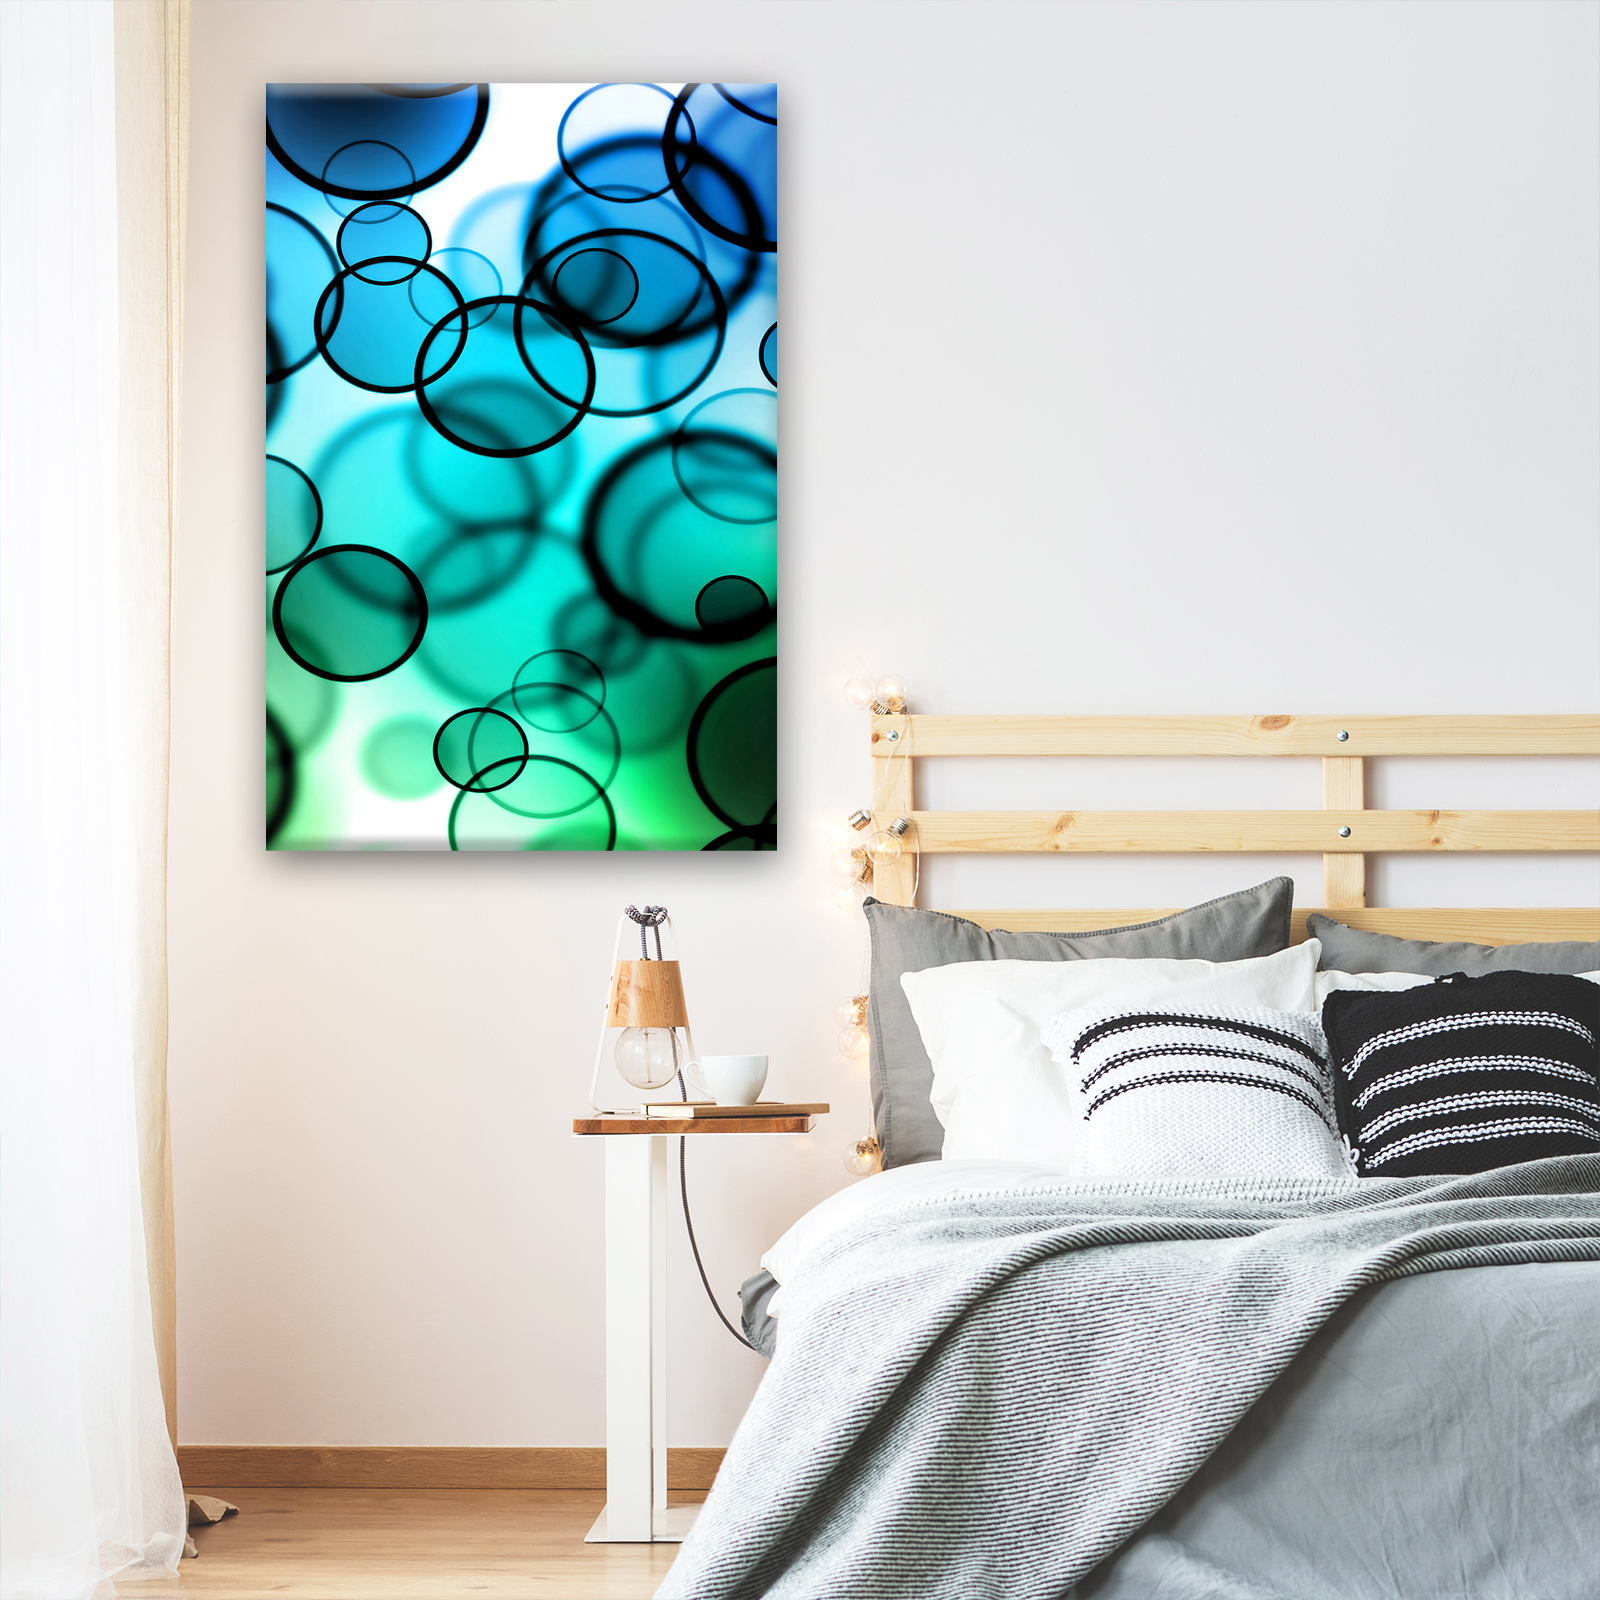 AB122 Blue Green Circles Modern Abstract Canvas Wall Art Large Picture Prints 